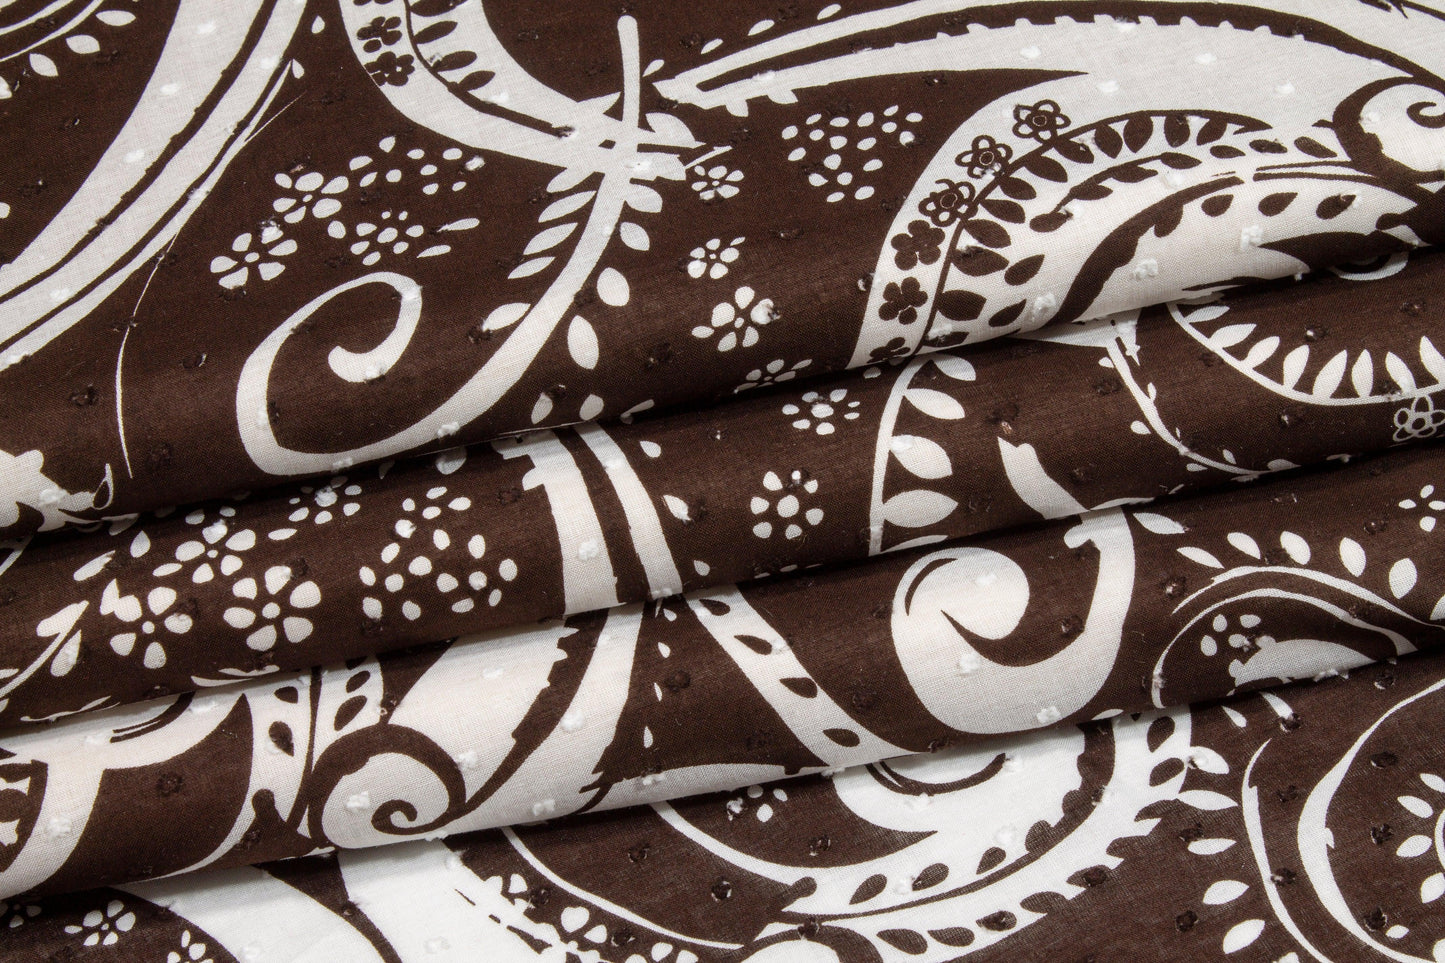 Embroidered Paisley Cotton Voile - Brown and White - Prime Fabrics